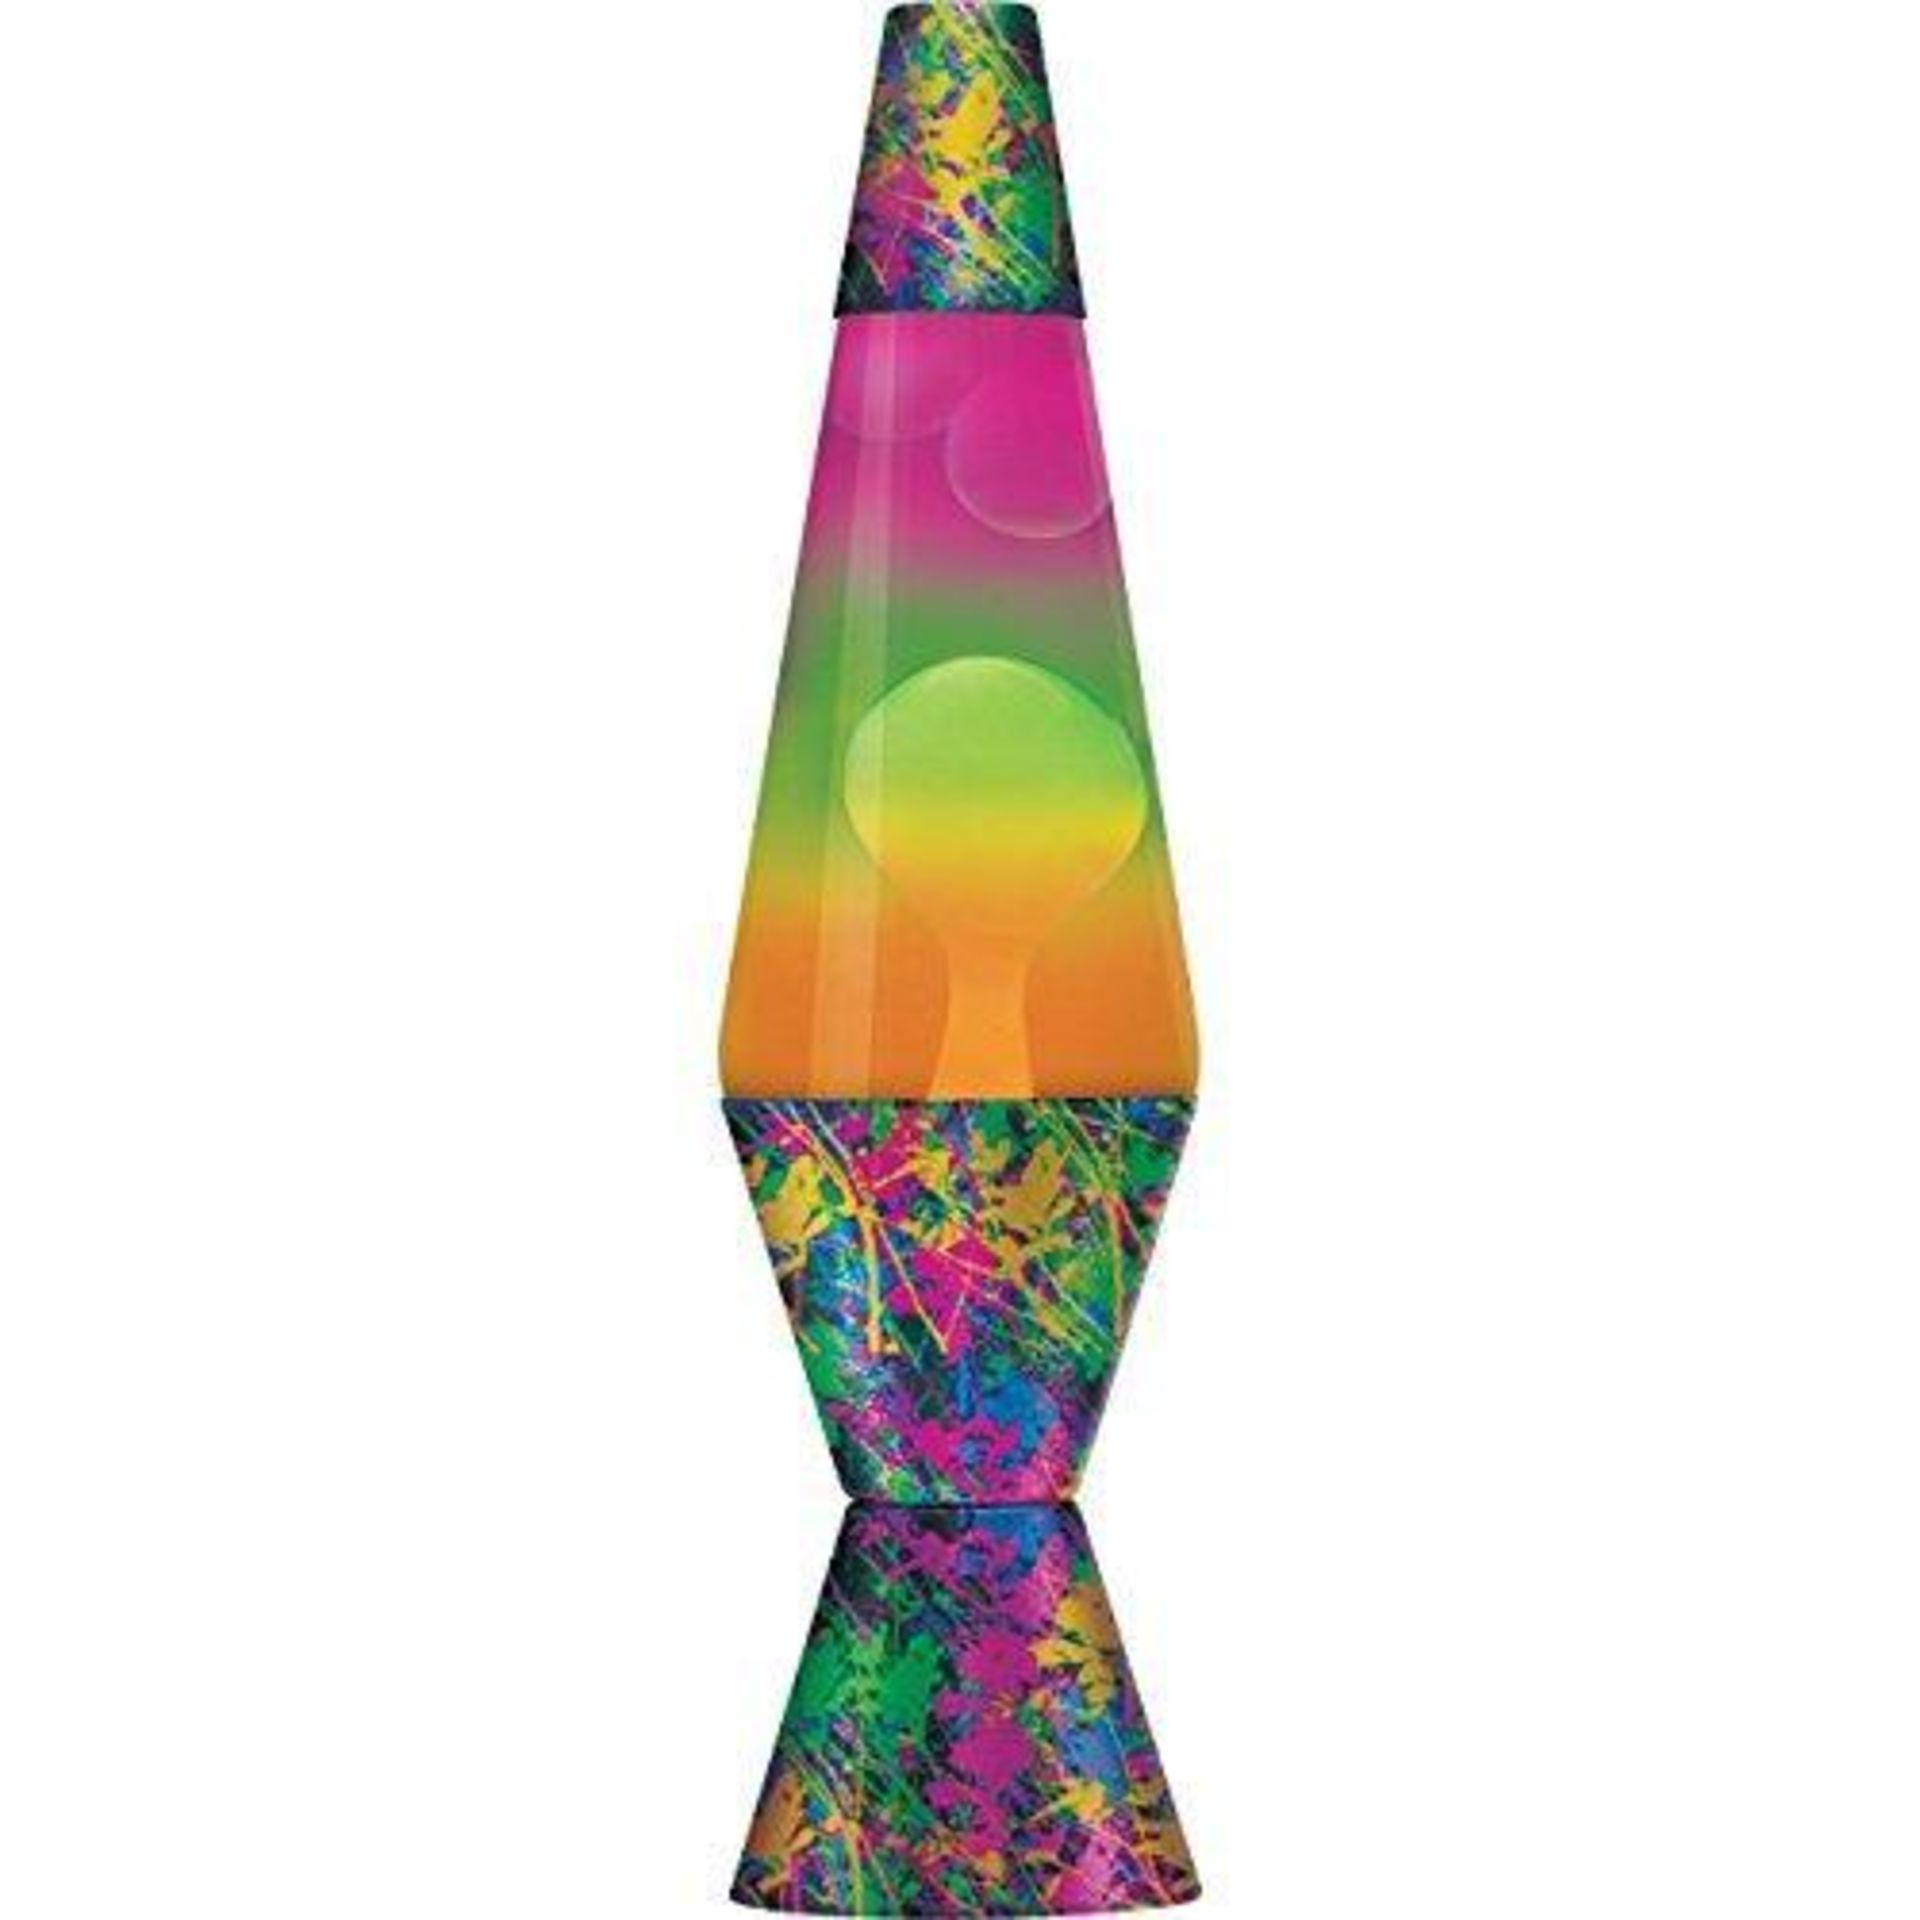 Schylling 14.5-Inch Colormax Lava Lamp with Rainbow Decal Base - Paintball